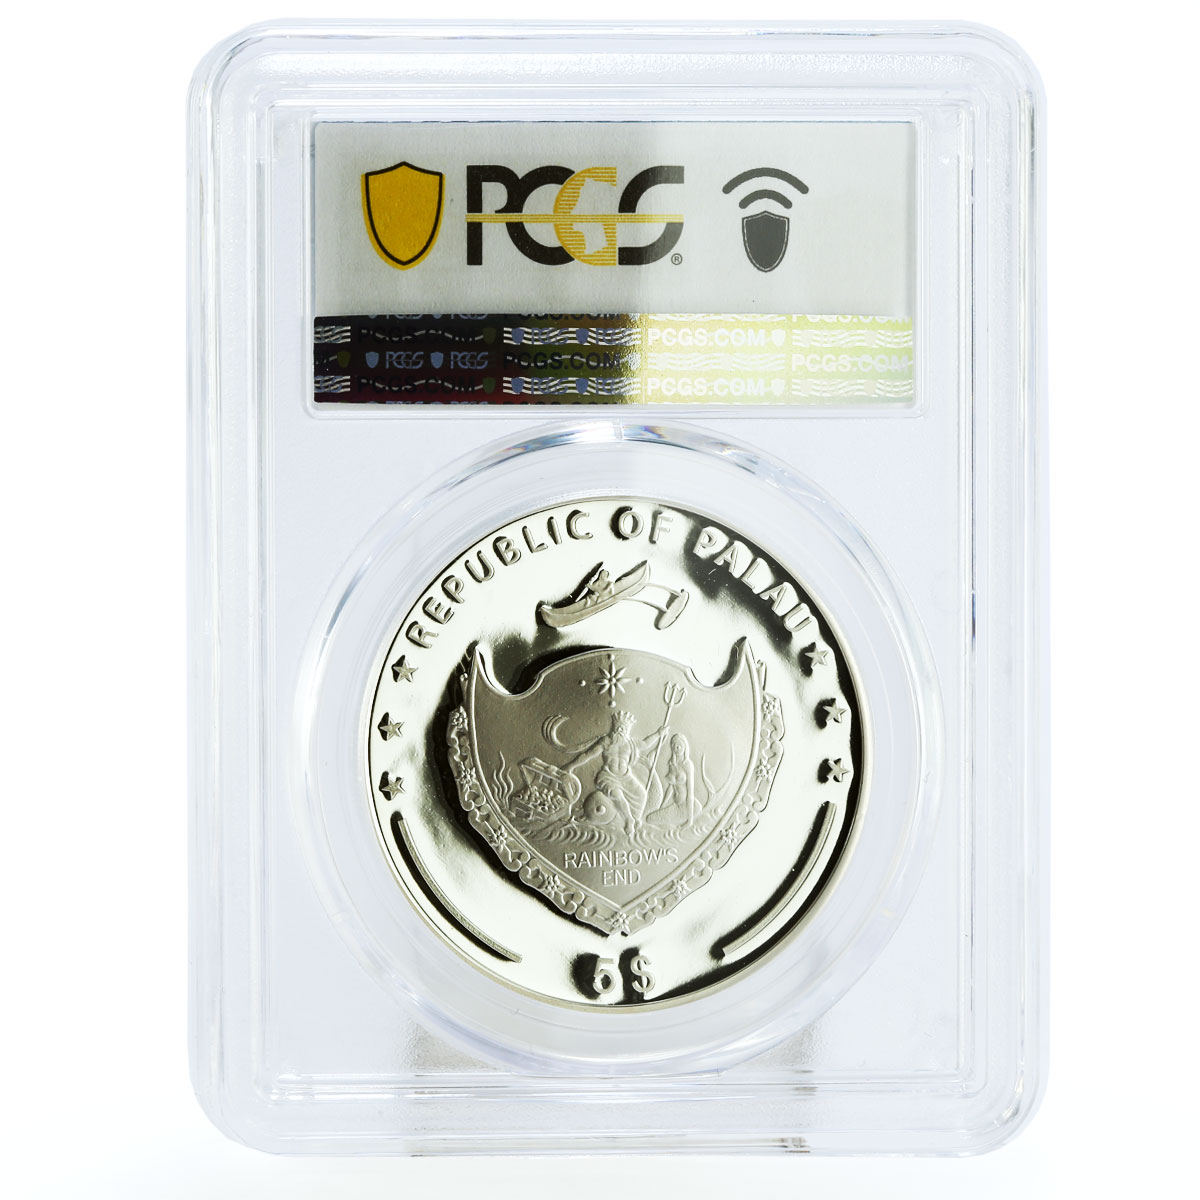 Palau 5 dollars World of Wonders Florence Cathedral PR70 PCGS silver coin 2011